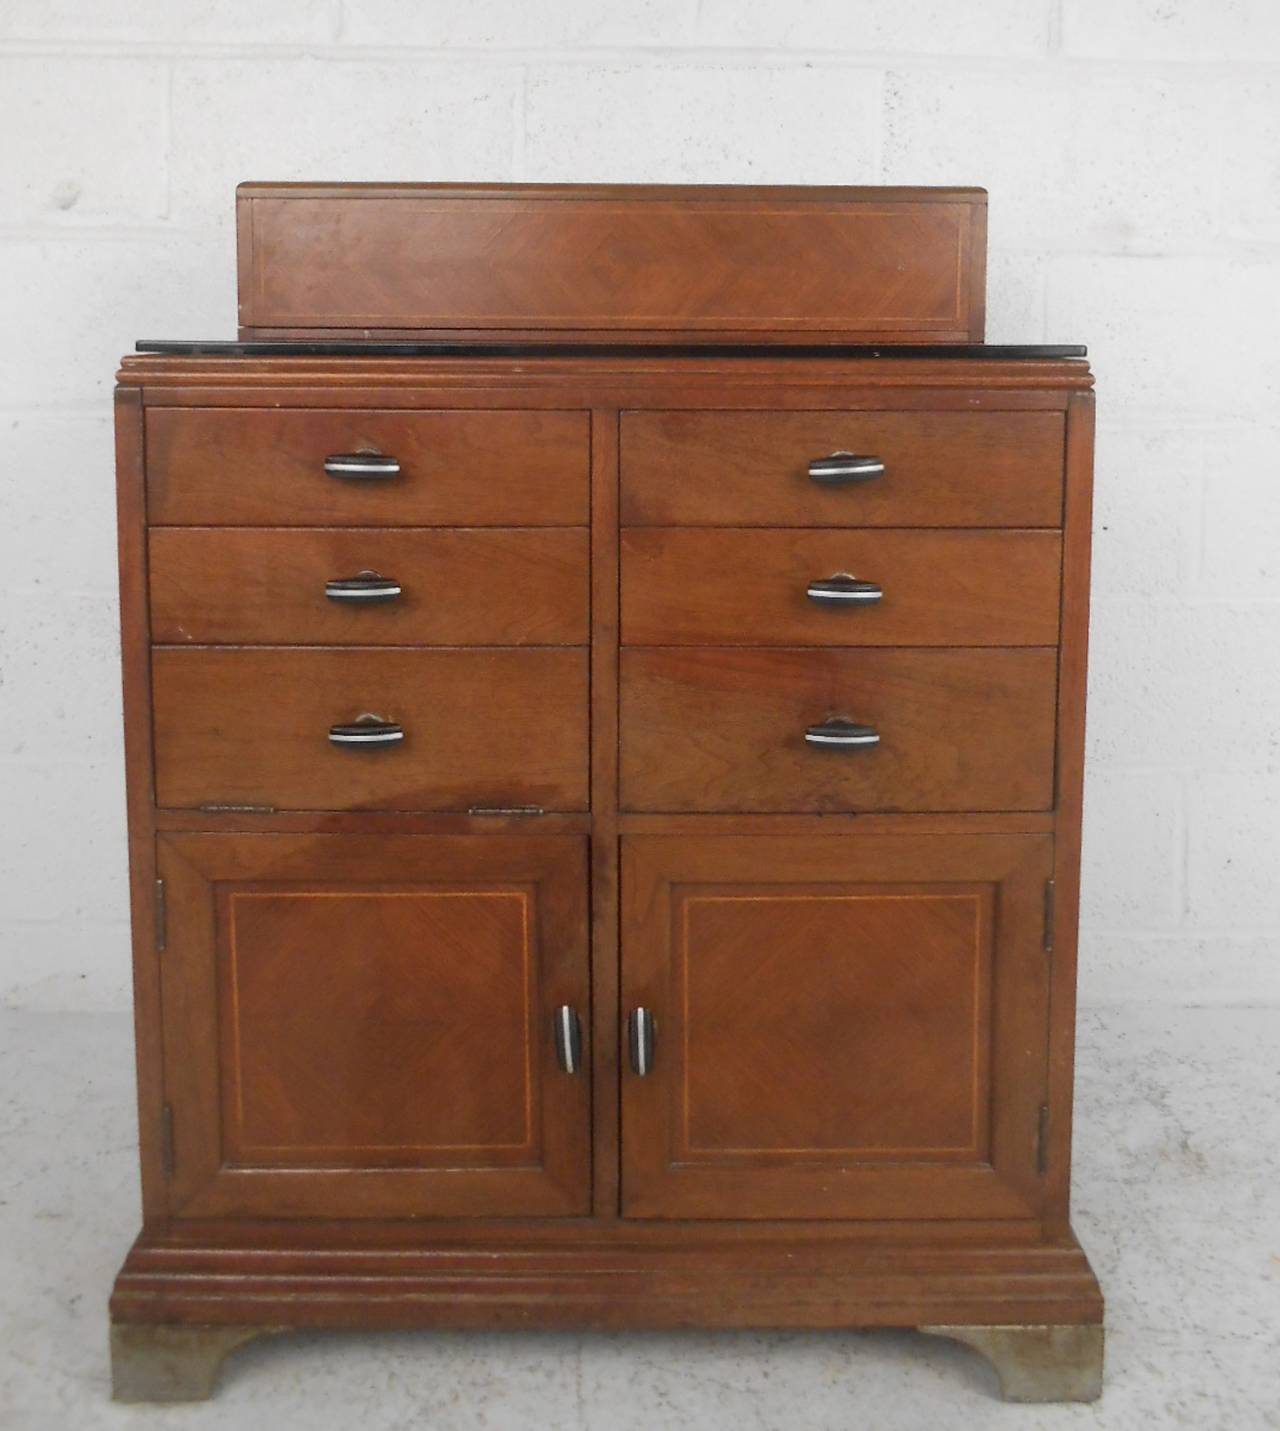 Vintage medical or dental station with diamond grain hinged top, black glass work area, multiple size cabinet space. Lovely detailing to the doors and top, original black handles, made by Charles Lentz & Sons.

(Please confirm item location - NY